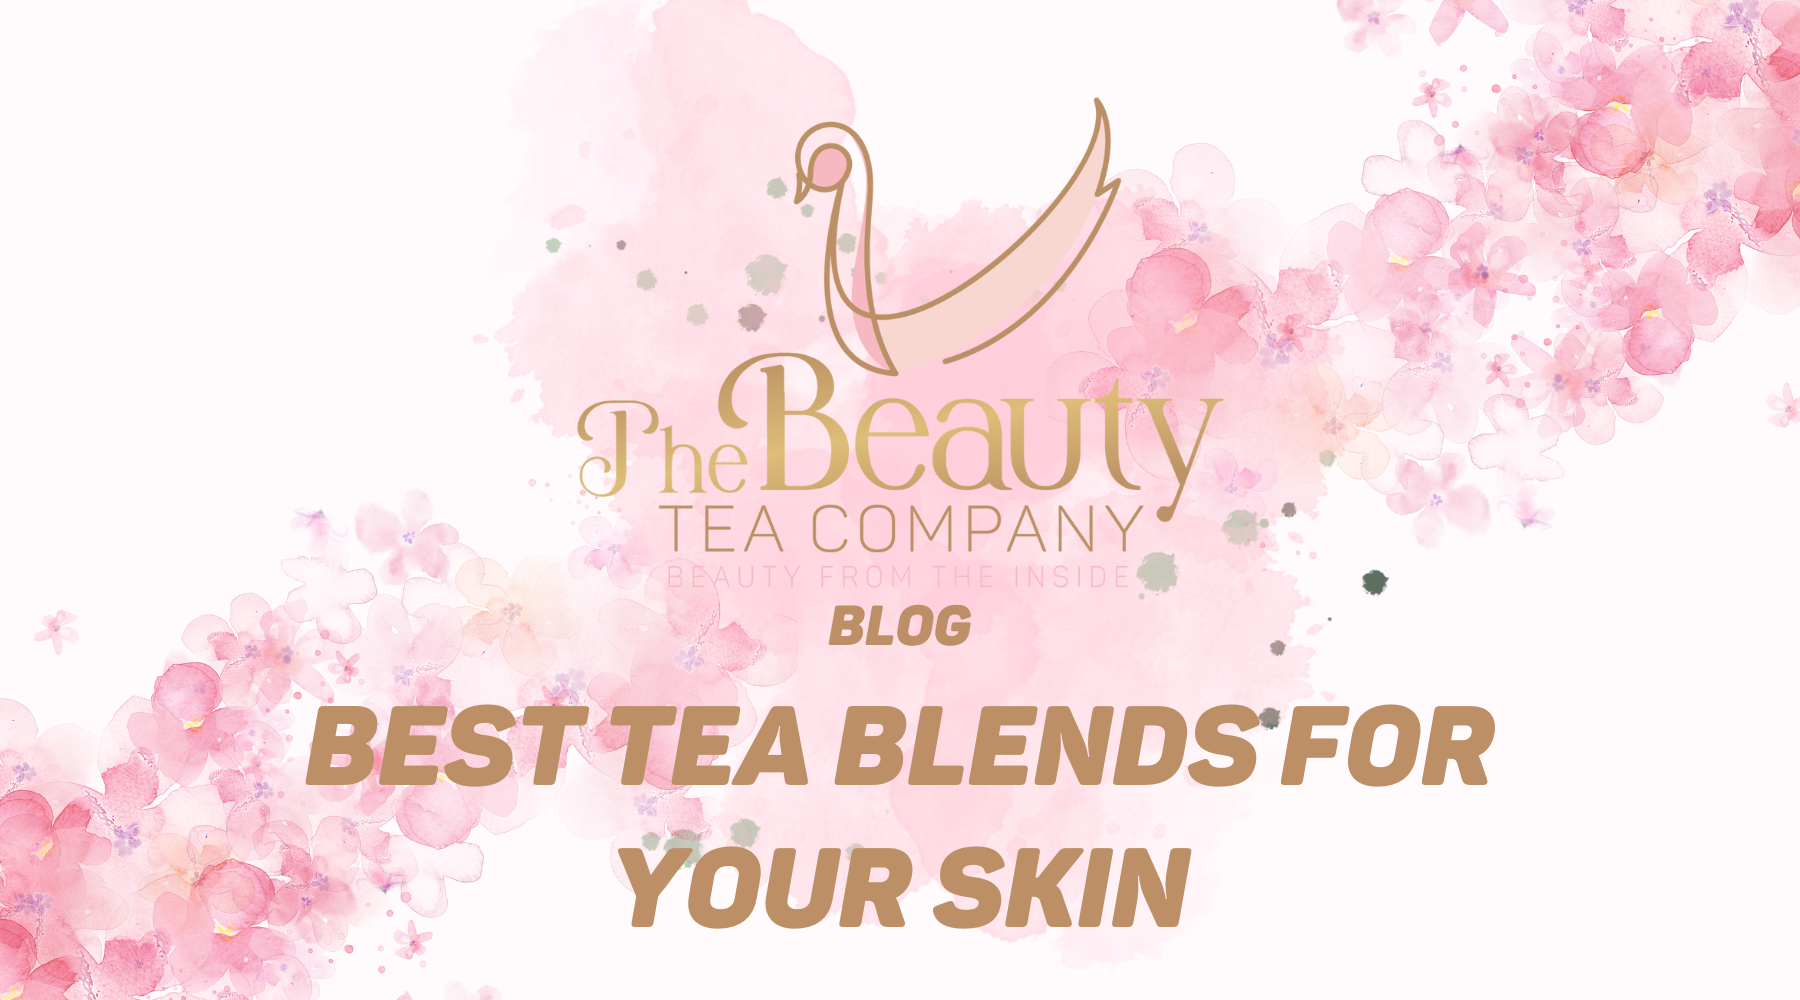 The Best tea blends for your skin.